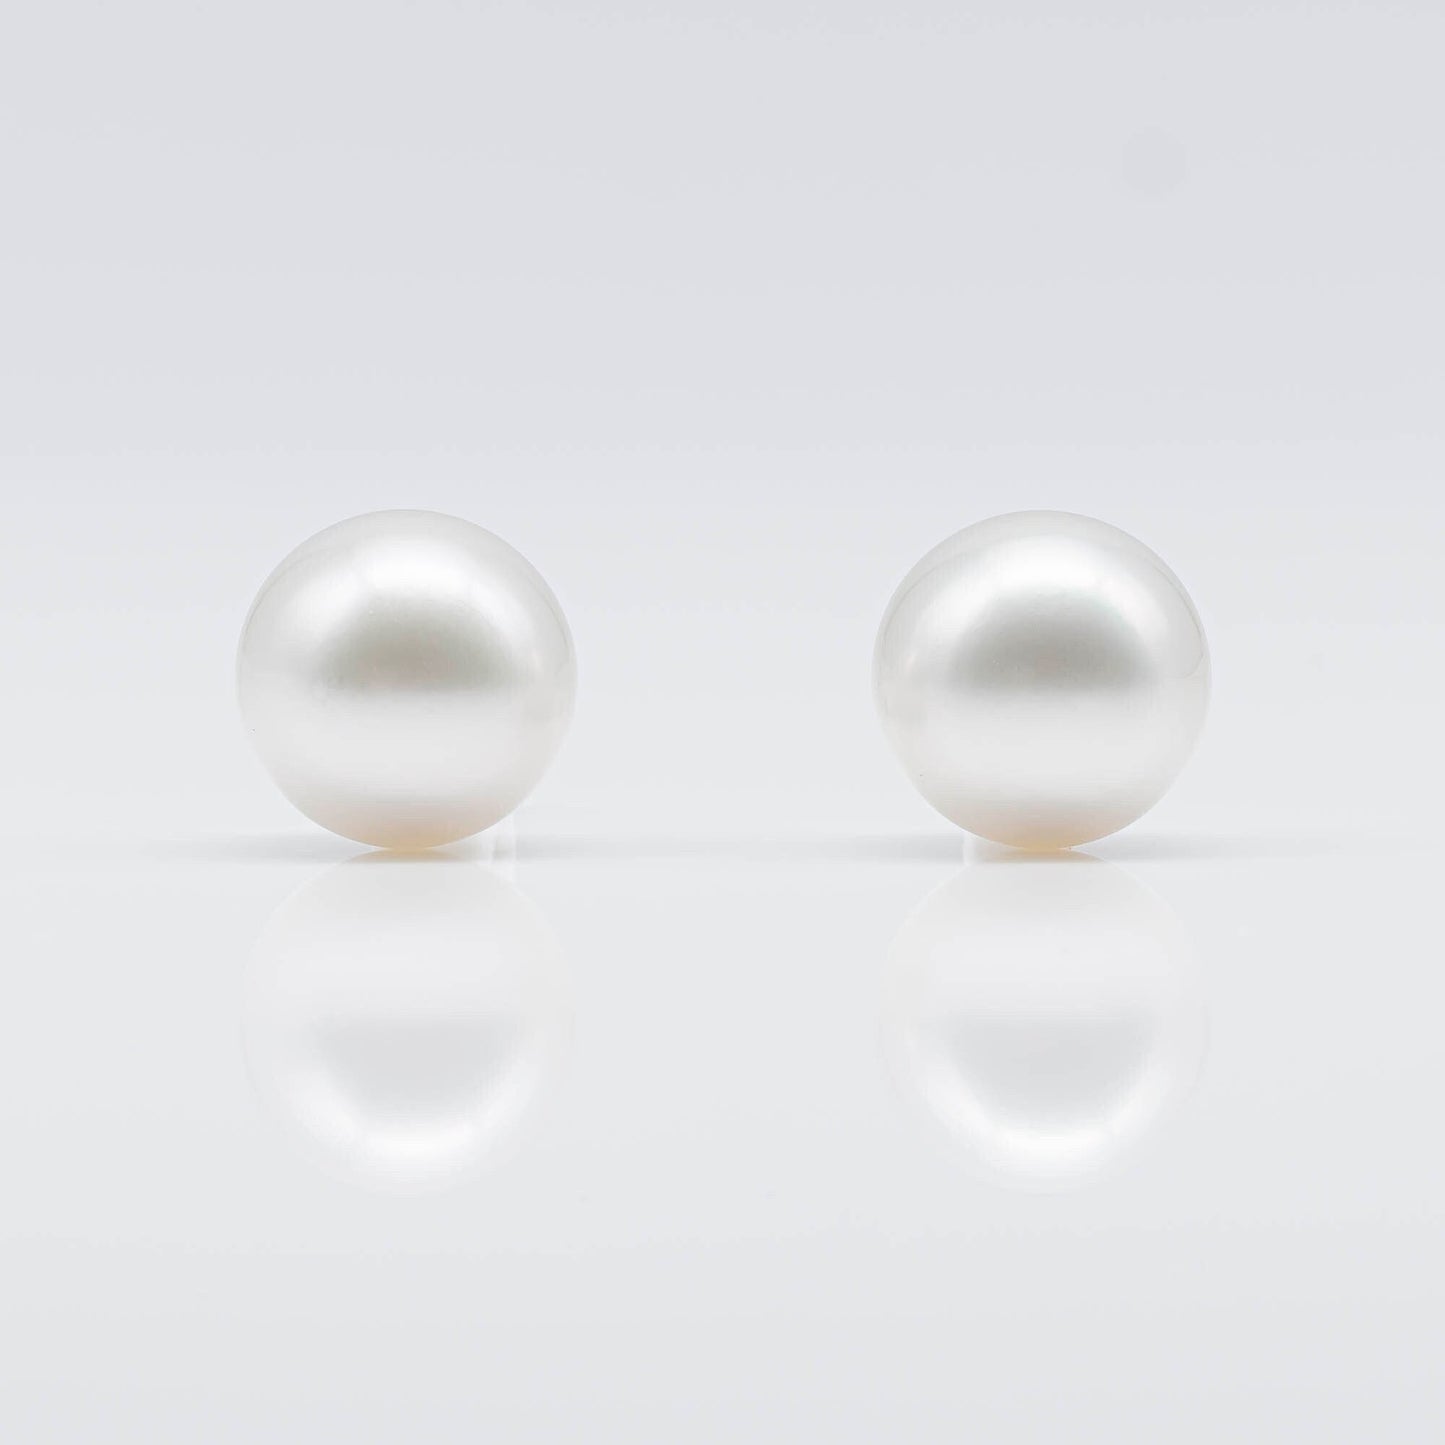 AAA 13mm South Sea Pearl Round Matching Pair in Natural White Color and High Luster with Minor Blemish in Half Drilled, SKU # 1693SS